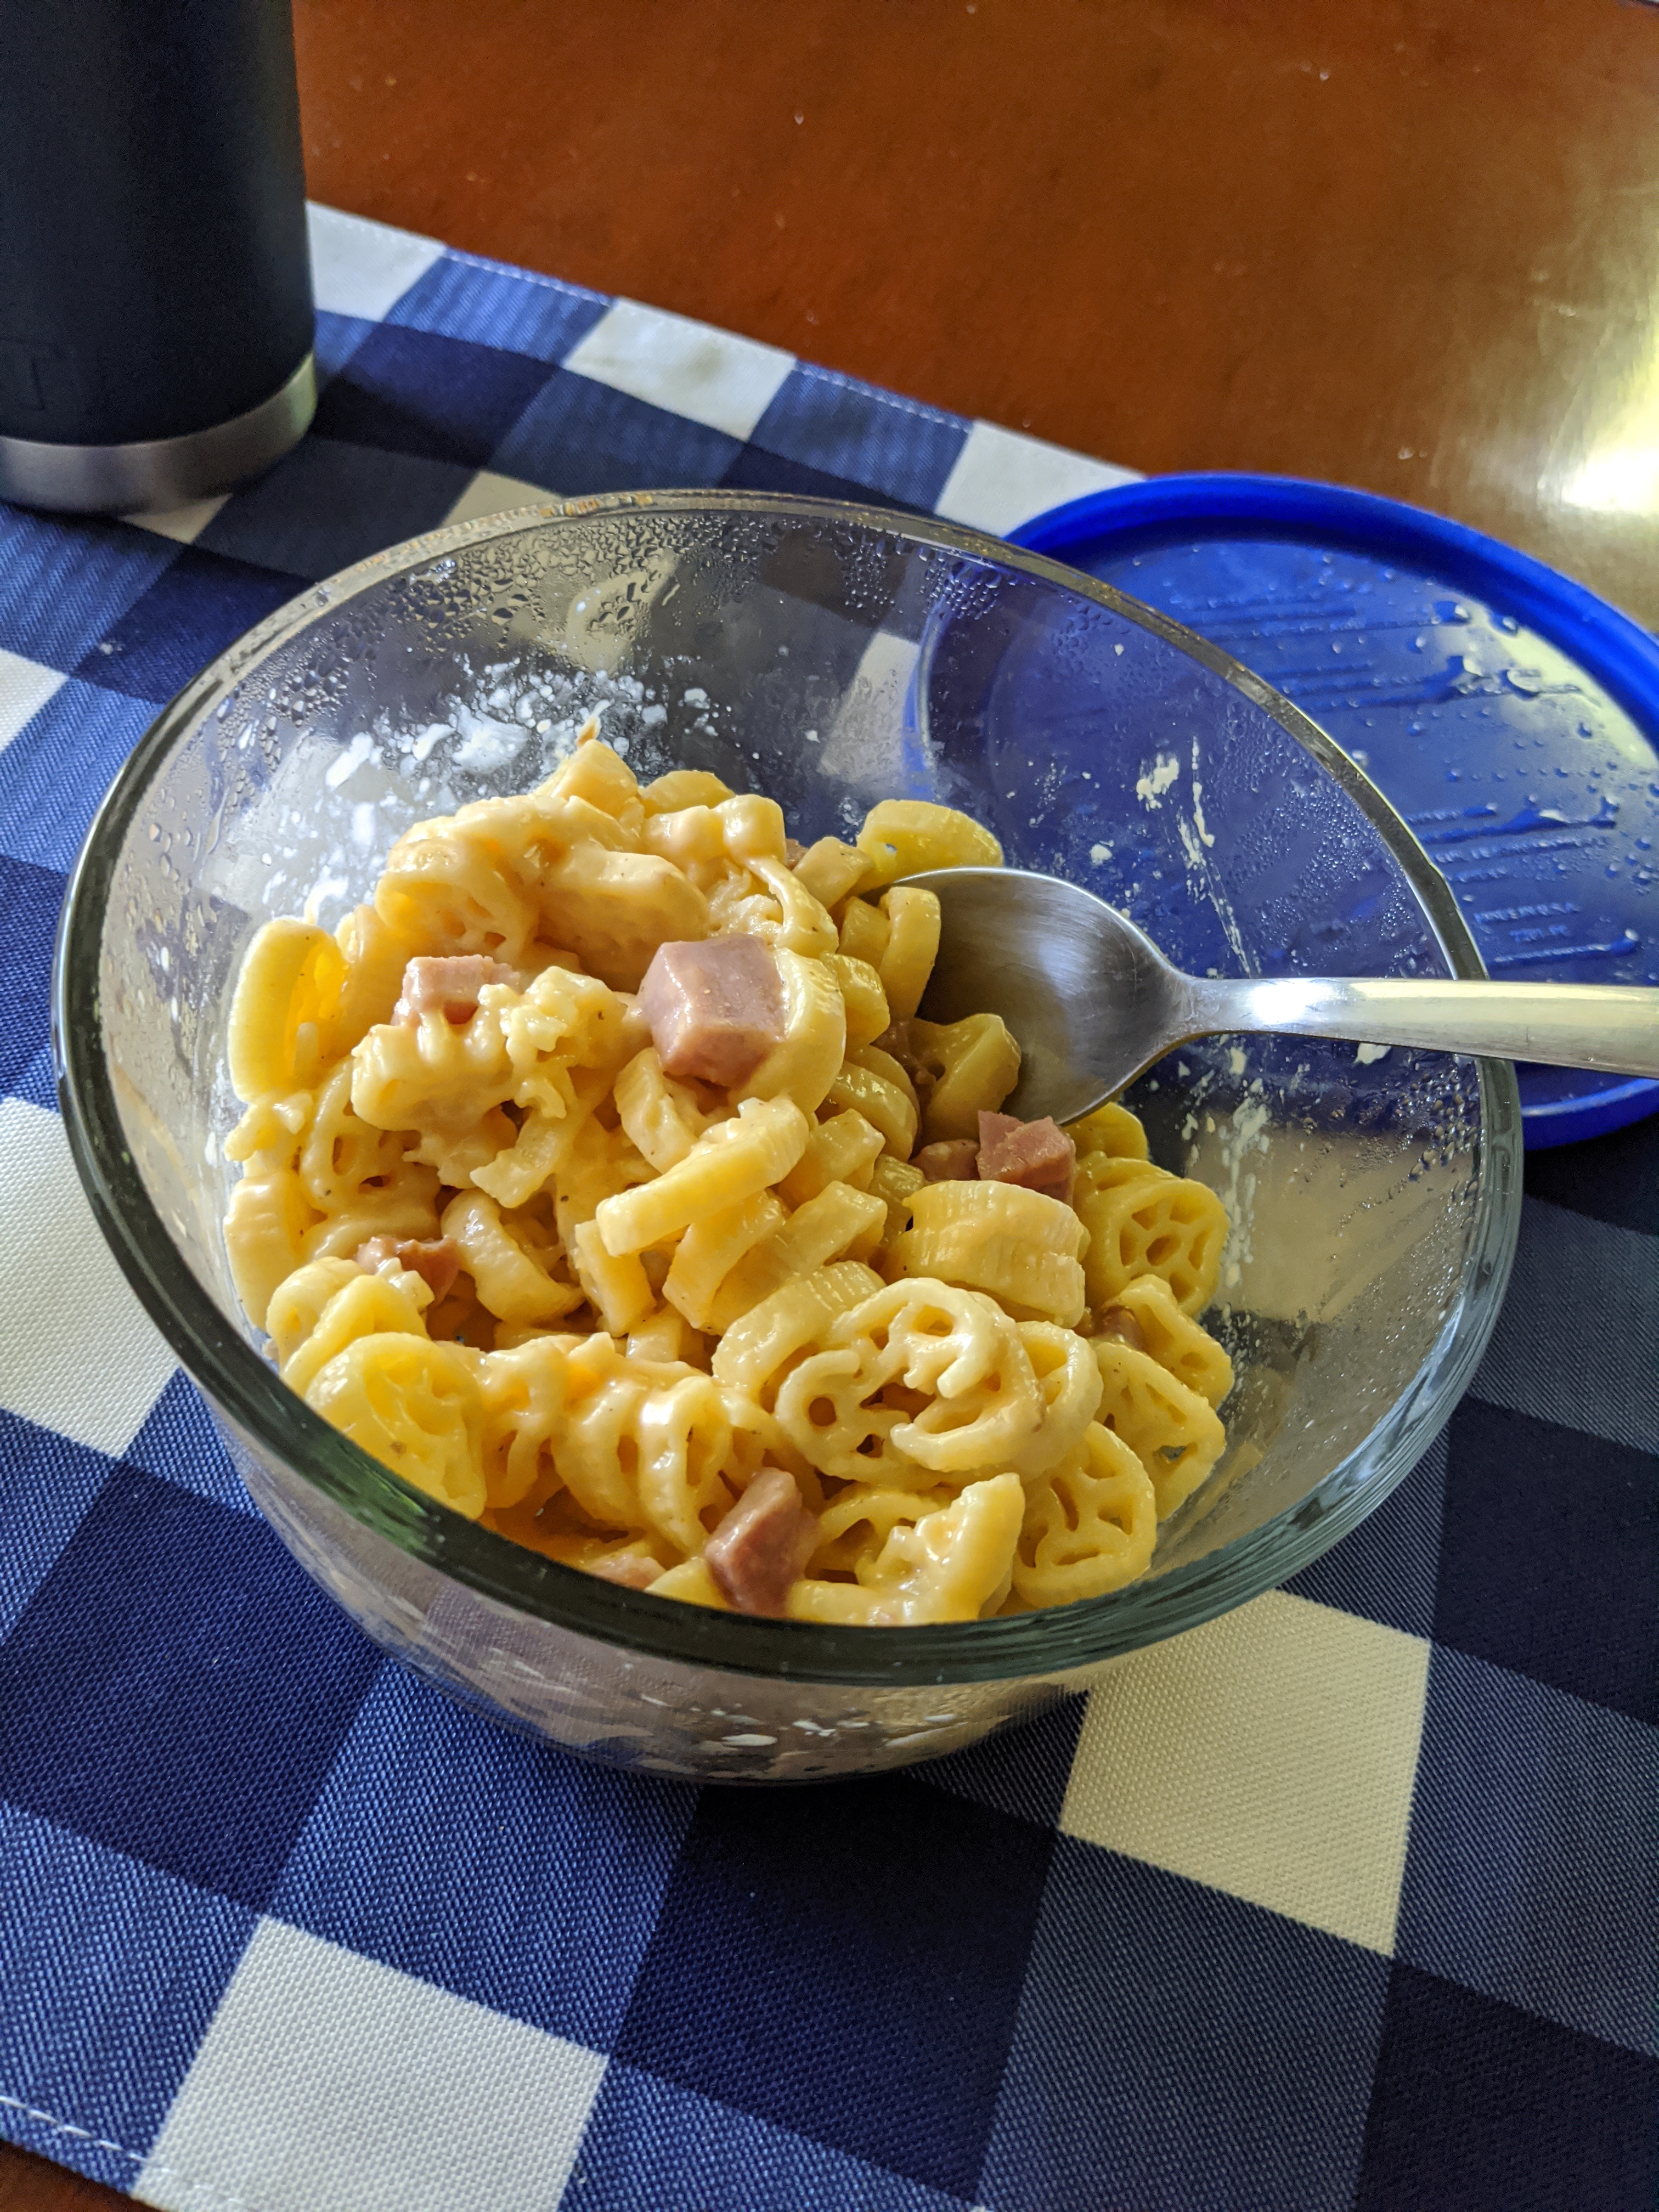 Delicious, budget friendly ham and cheese pasta made in the quick cooker makes great lunches